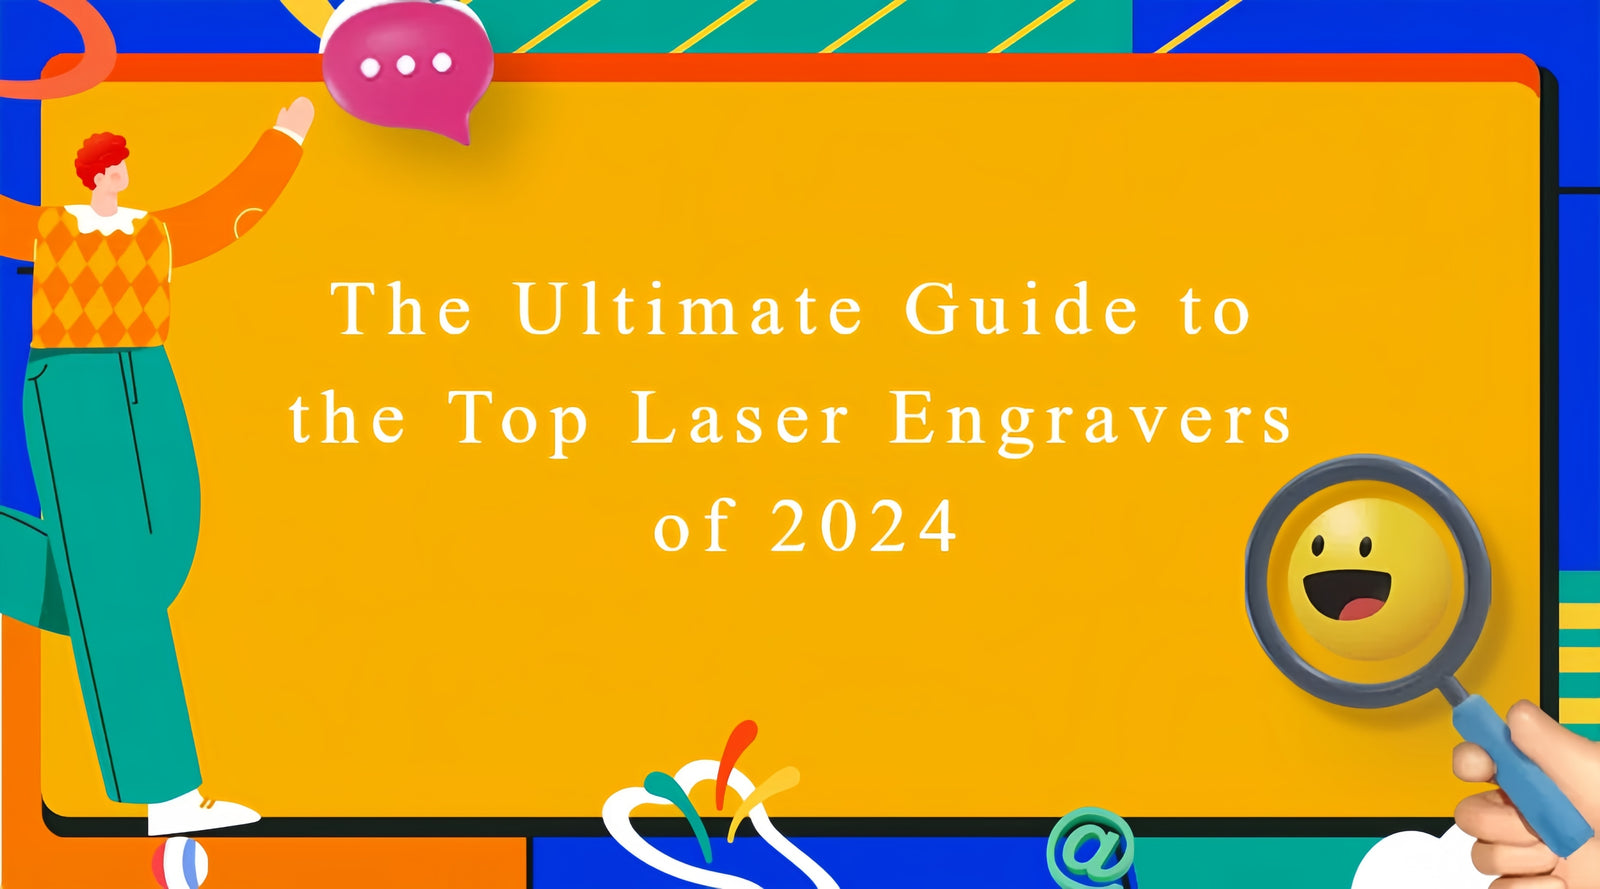 The Ultimate Guide to the Top Laser Engravers of 2024